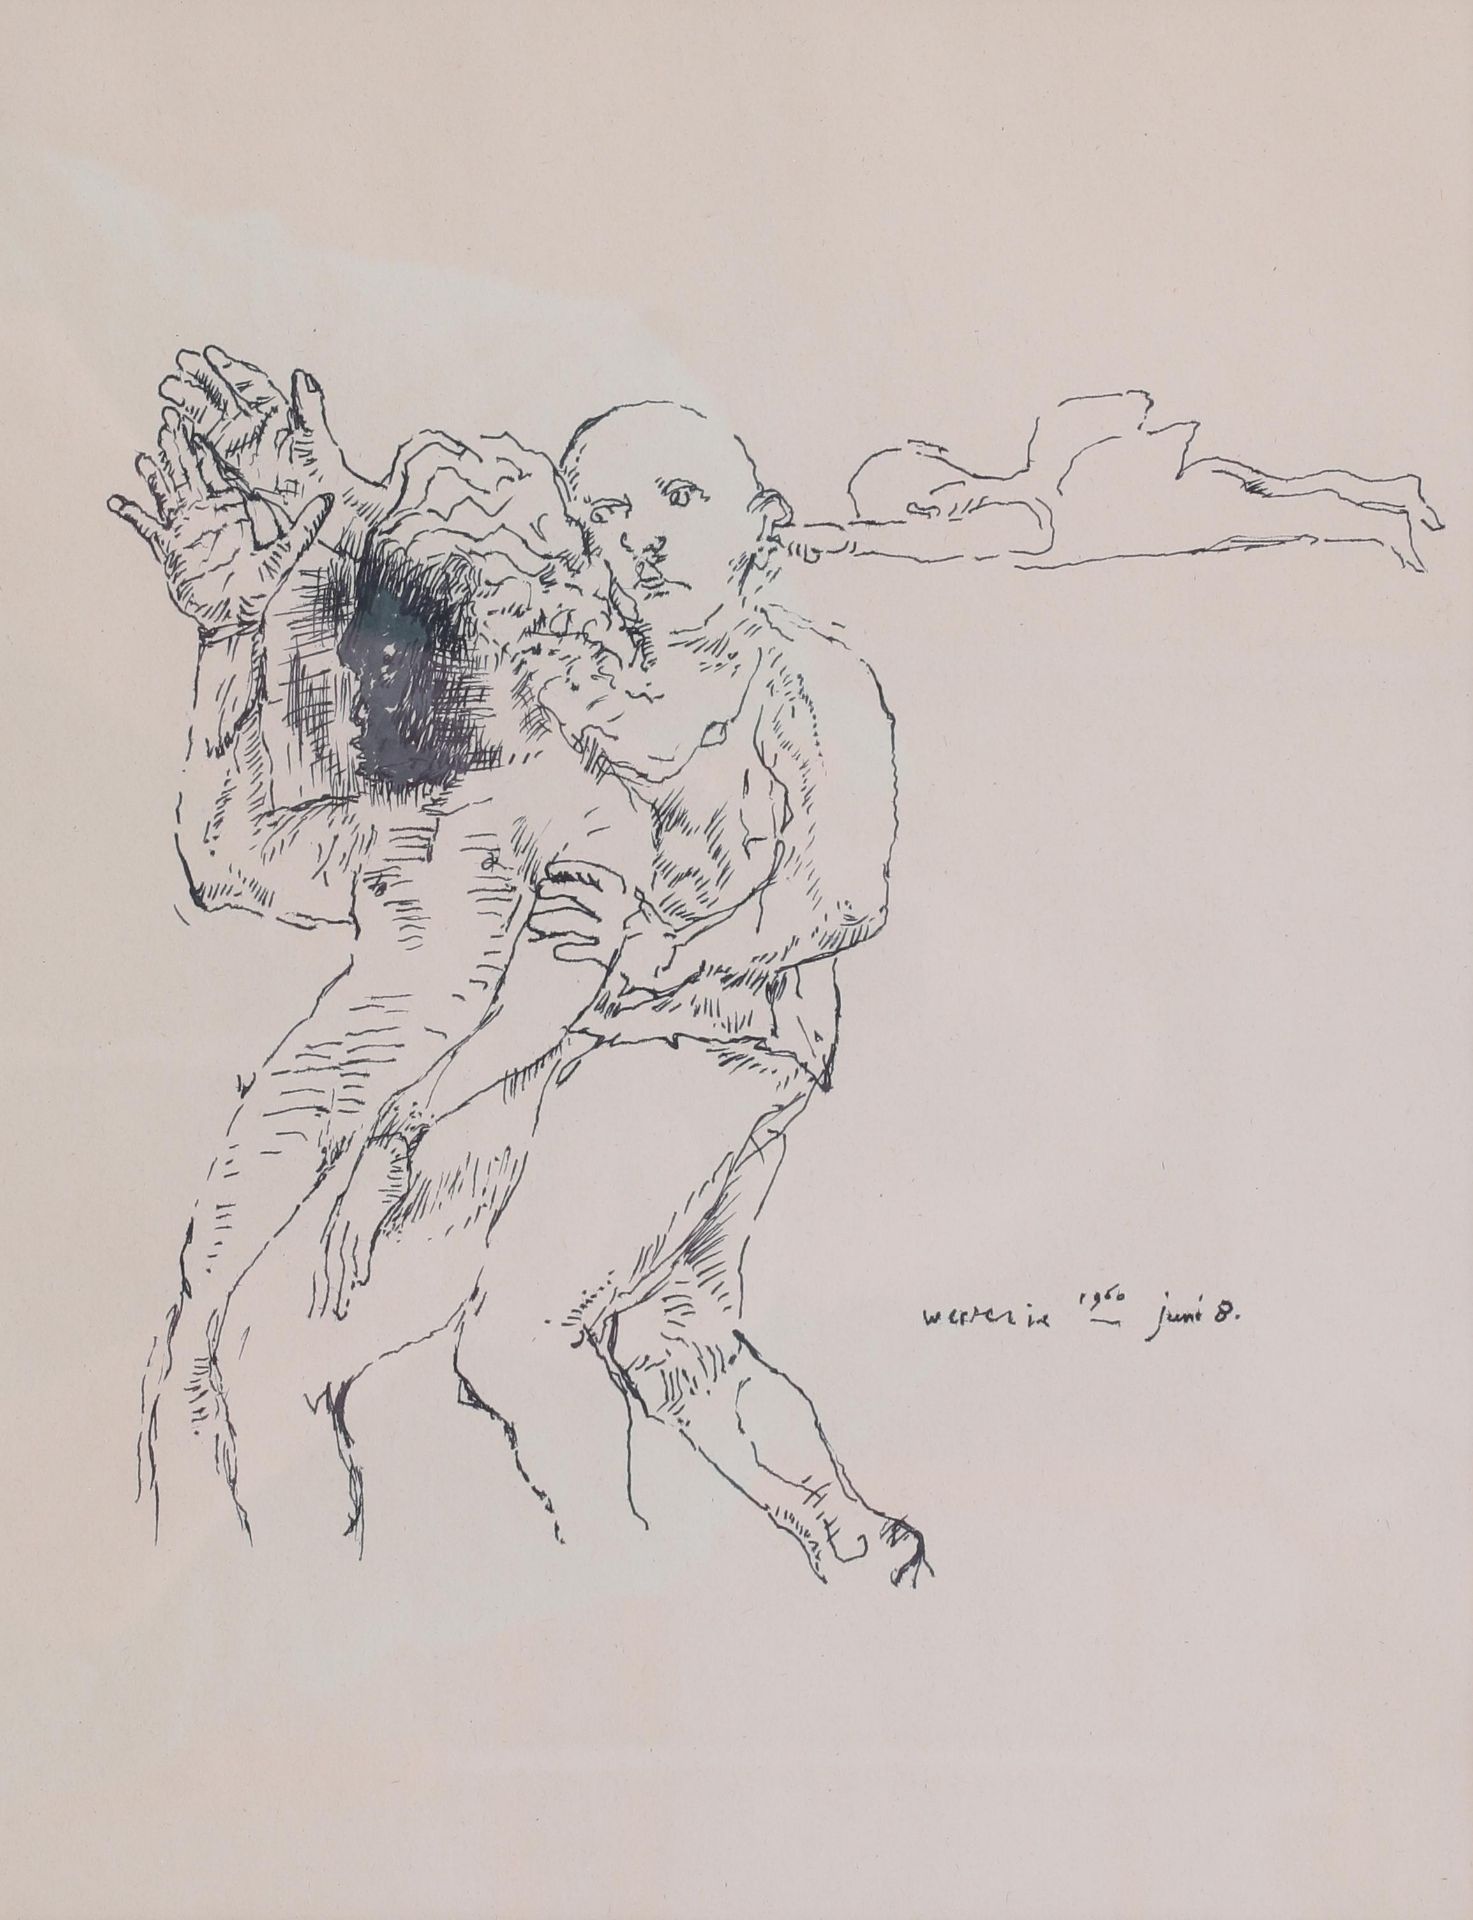 Co Westerik (1924-2018) Untitled. Signed and dated 8 juni 1960 lower right. Inkttekening 29 x 22,5